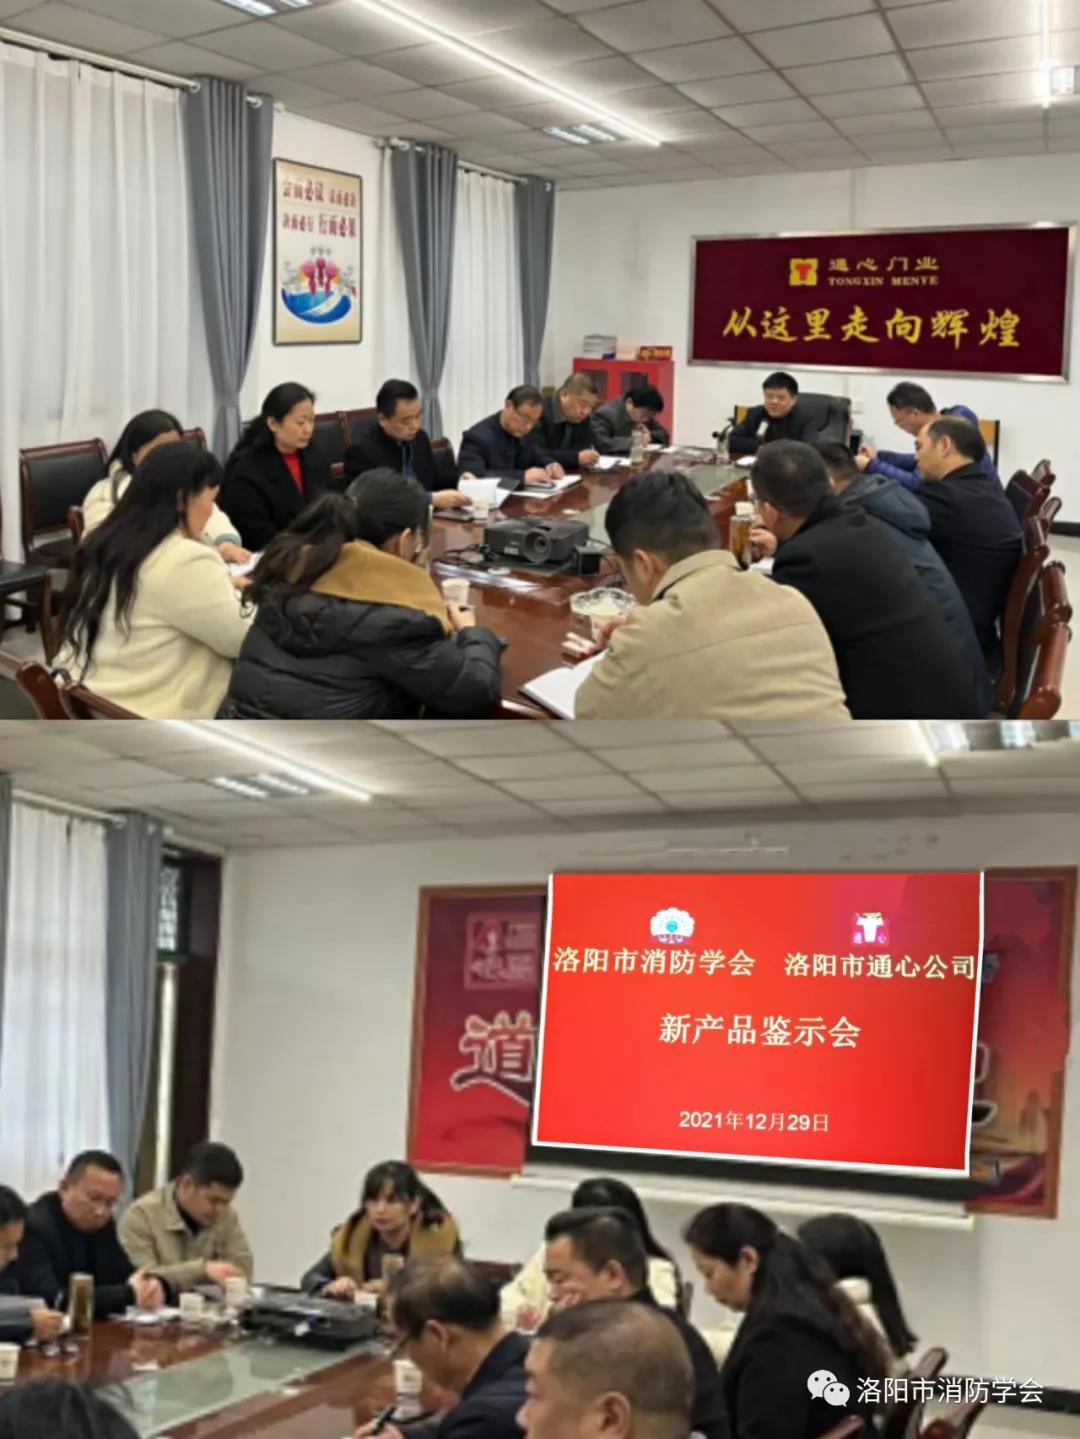 Luoyang Tongxin Safety Equipment Co., Ltd. successfully held the new product appraisal meeting